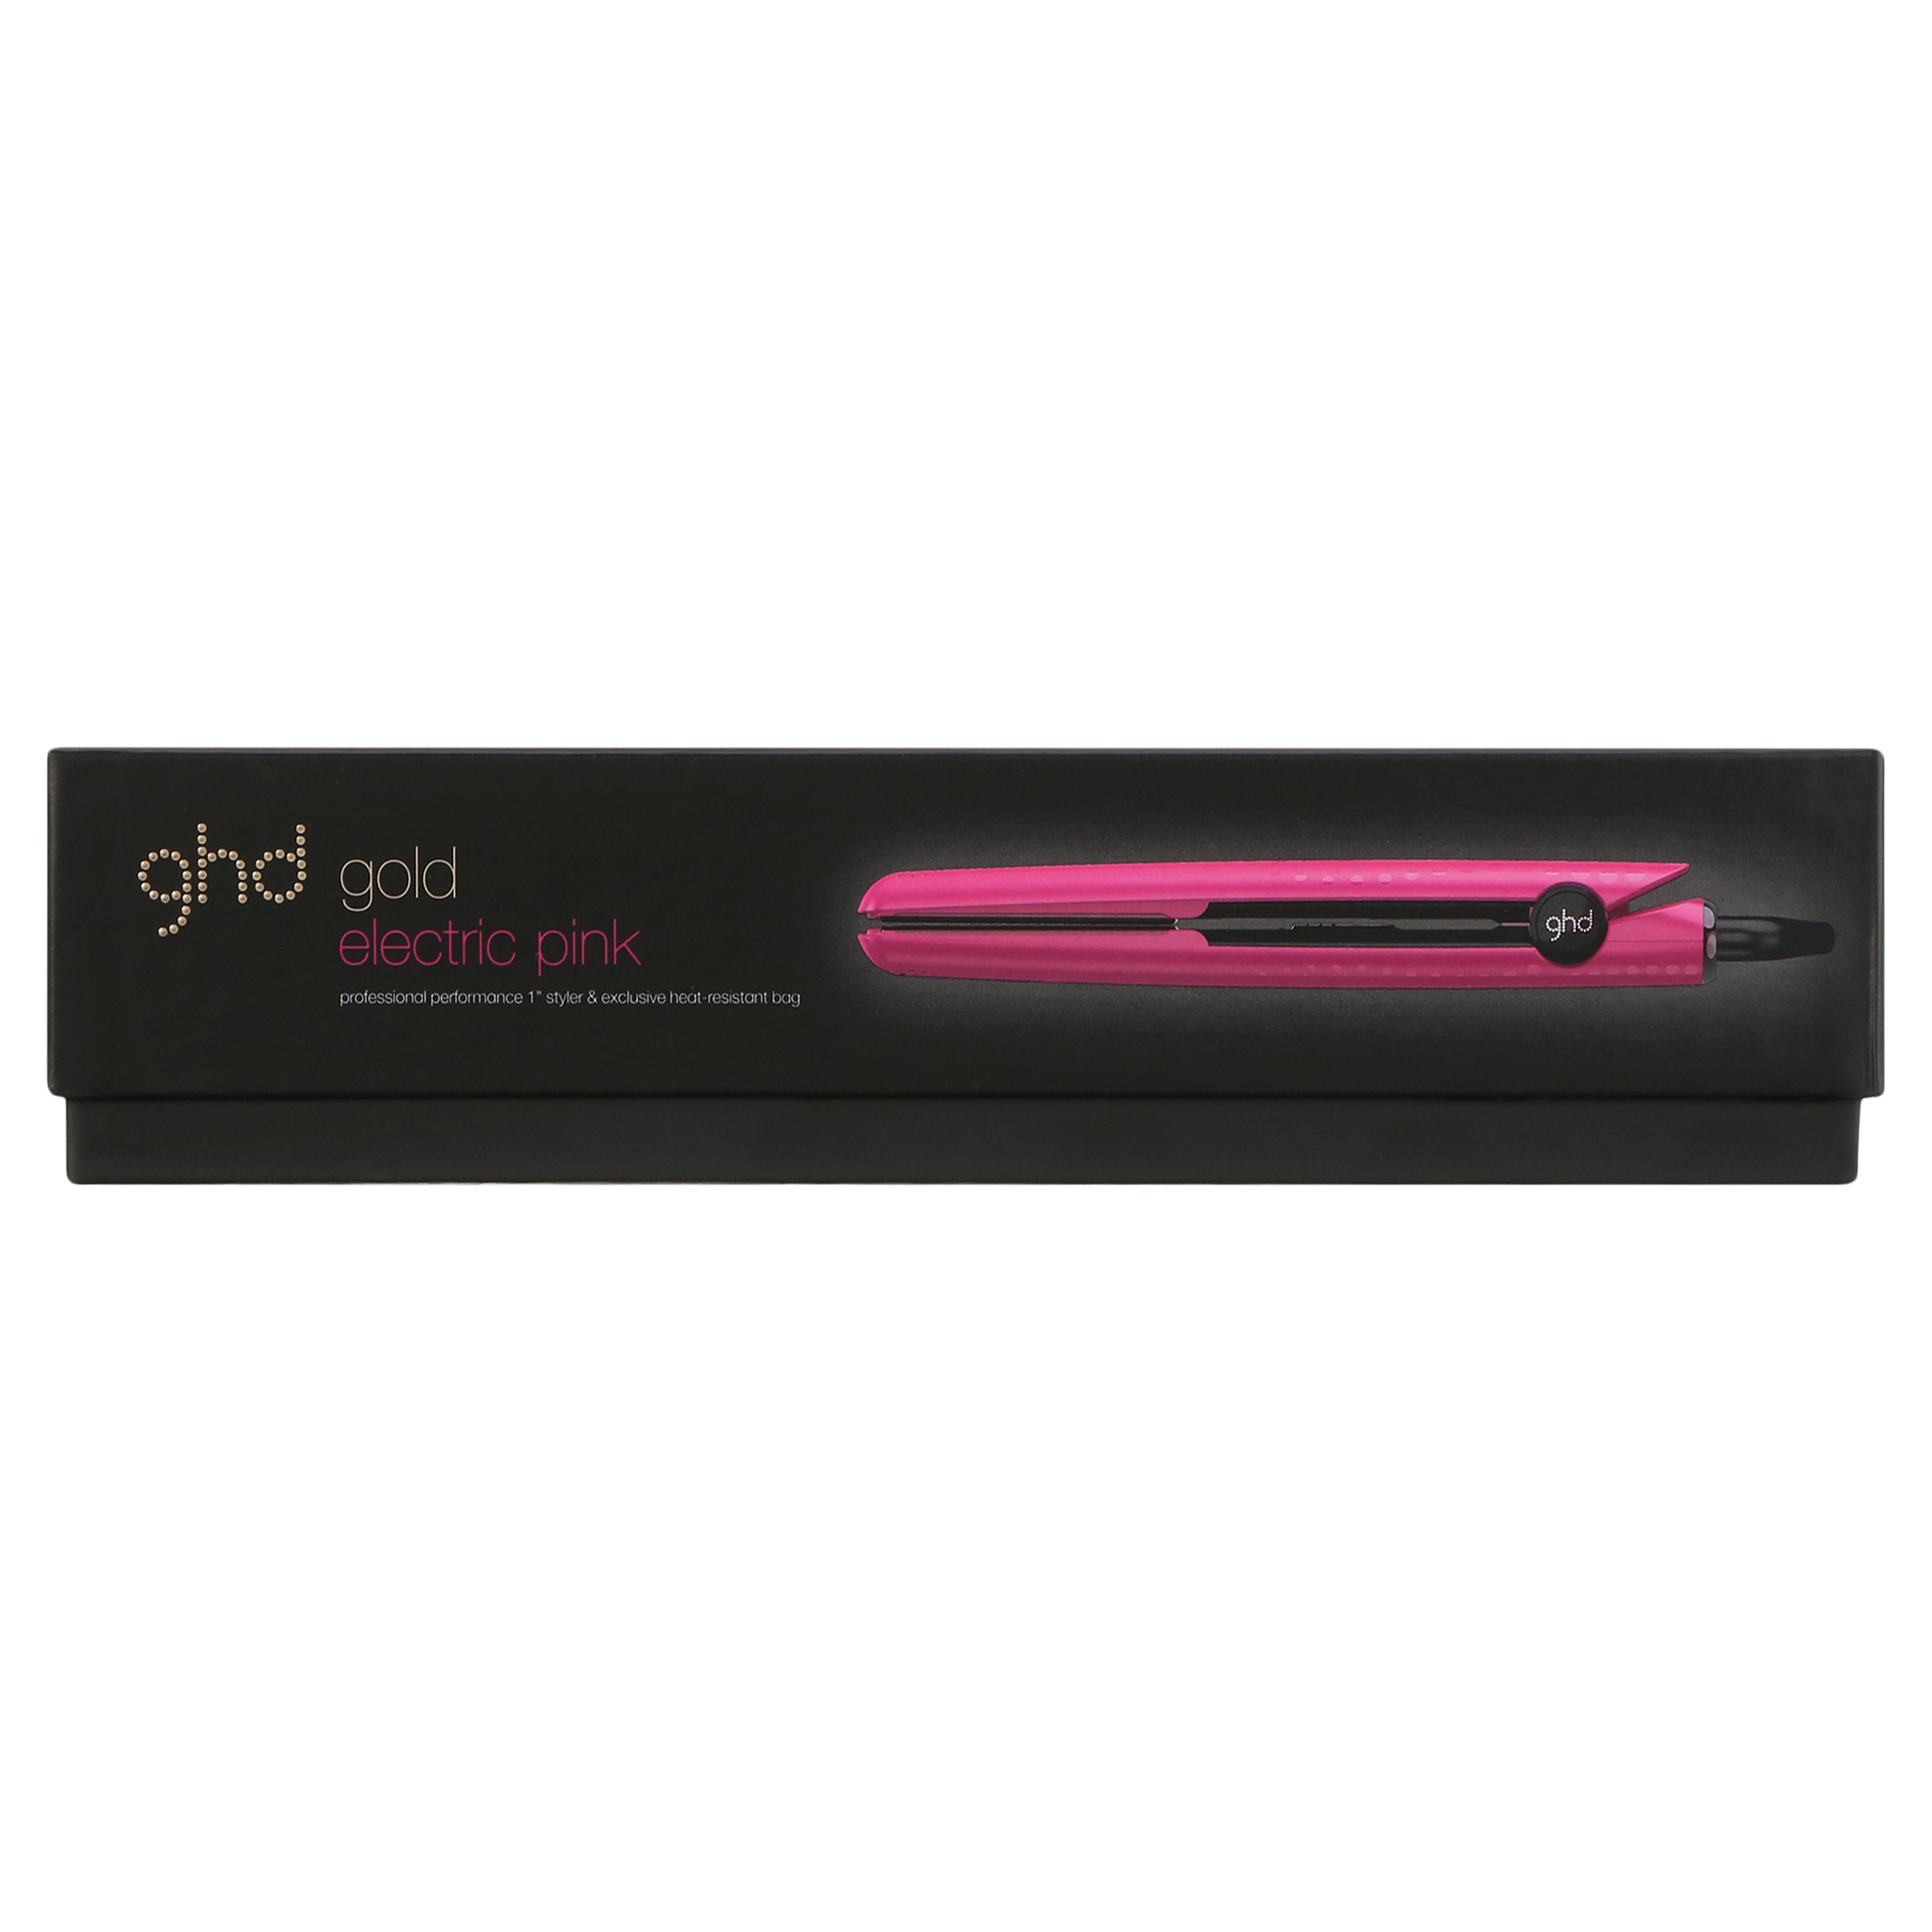 GHD Electric Pink Gold Styler Flat Iron, 1" - image 5 of 10